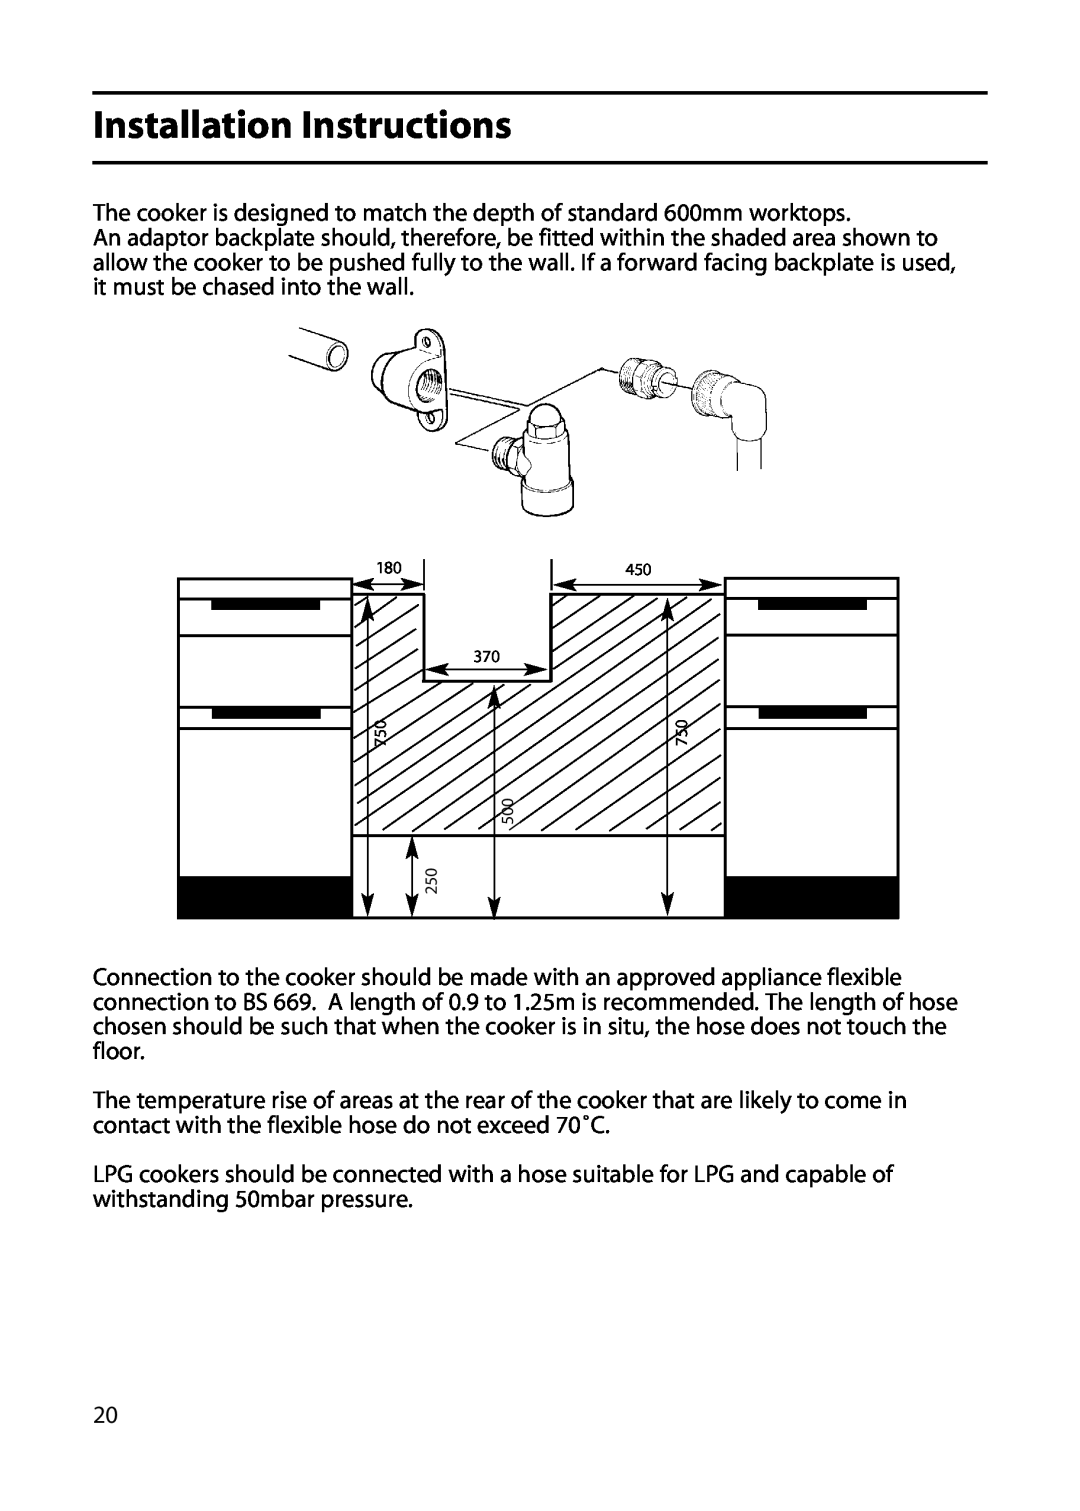 Indesit KP100IX manual Installation Instructions, The cooker is designed to match the depth of standard 600mm worktops 